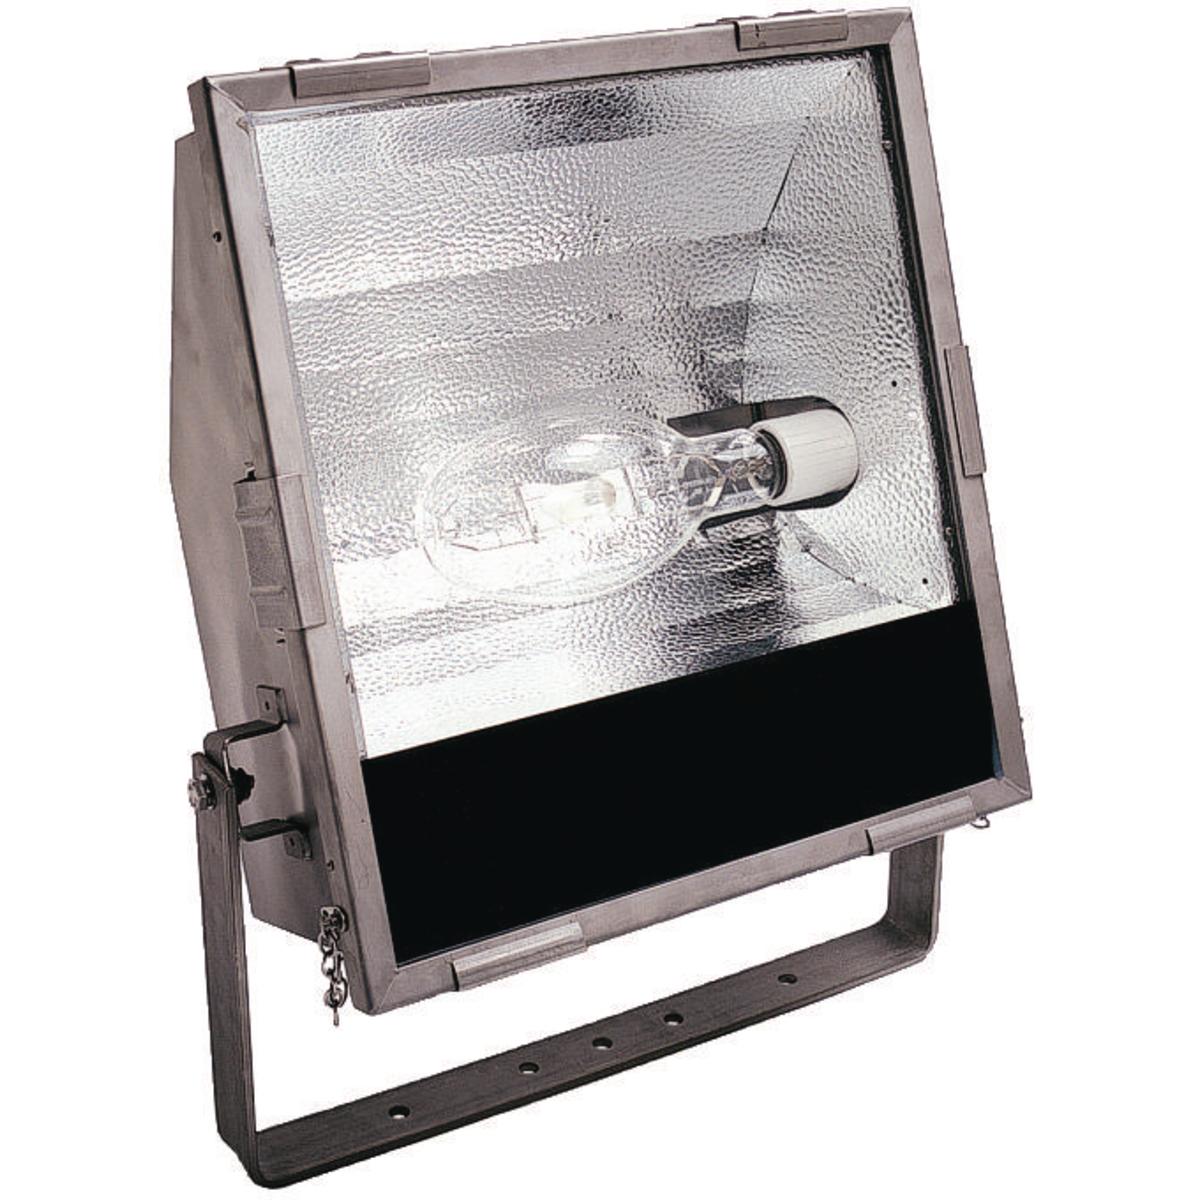 Hubbell KFS405SS KF Series - Stainless Steel 400 Watt High Pressure Sodium Marine Floodlight (Lamp Not Included) - 480V At 60Hz  ; Type 316 Stainless Steel Housing. 16-gauge housing ensures low corrosion and long life, reducing maintenance costs ; Rugged quick-release 316